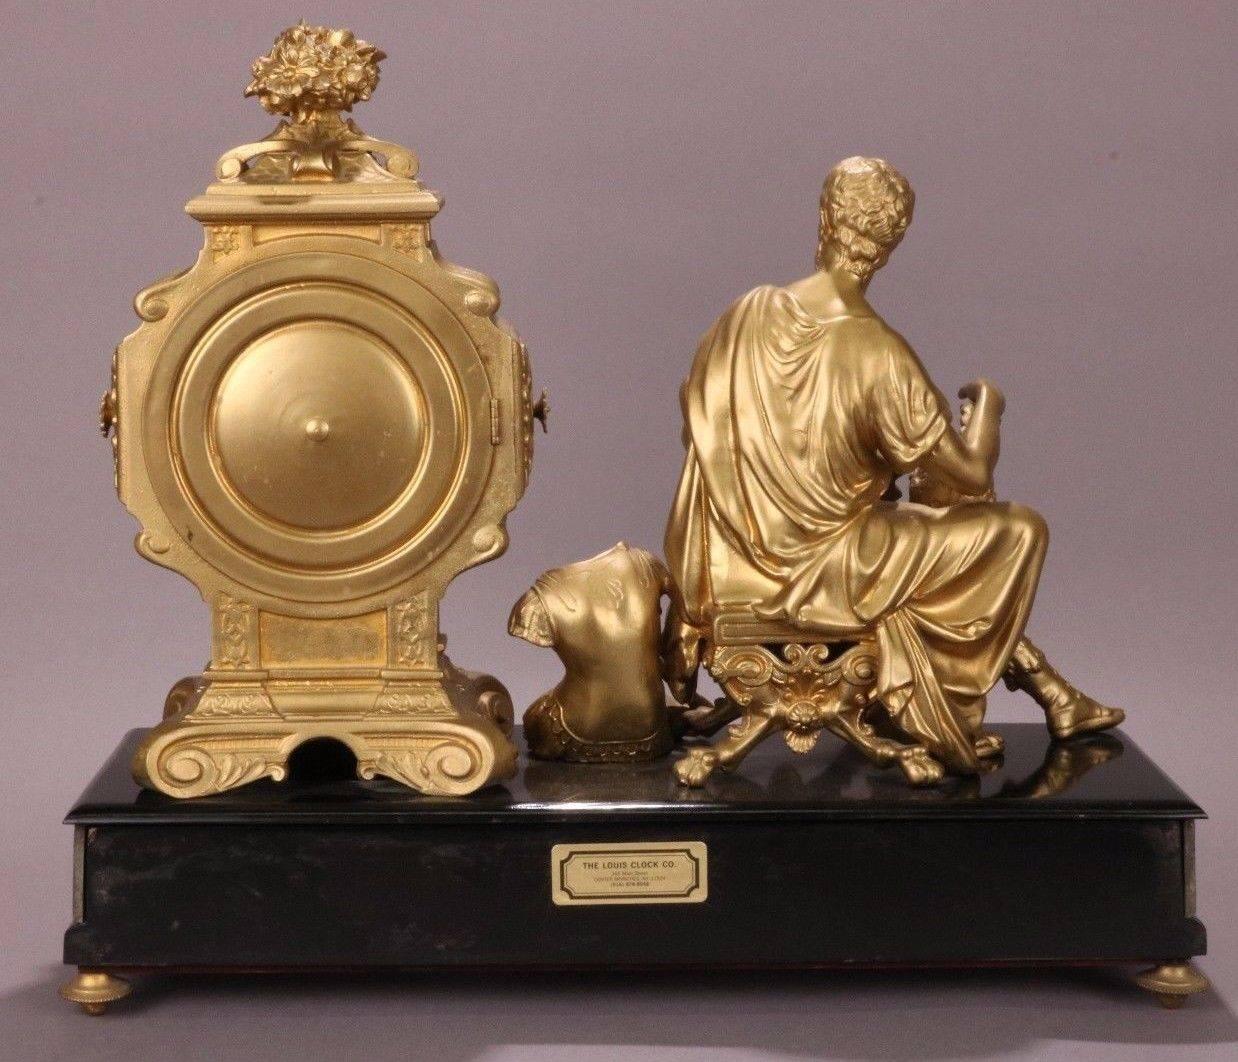 Elegant antique Ansonia bronzed white metal mantel clock features a stunning classical male seated with armor, sword, and helmet, circa 1880. Exposed gears on face of clock create a beautiful aesthetic. Finish is a gilt bronze on white metal.